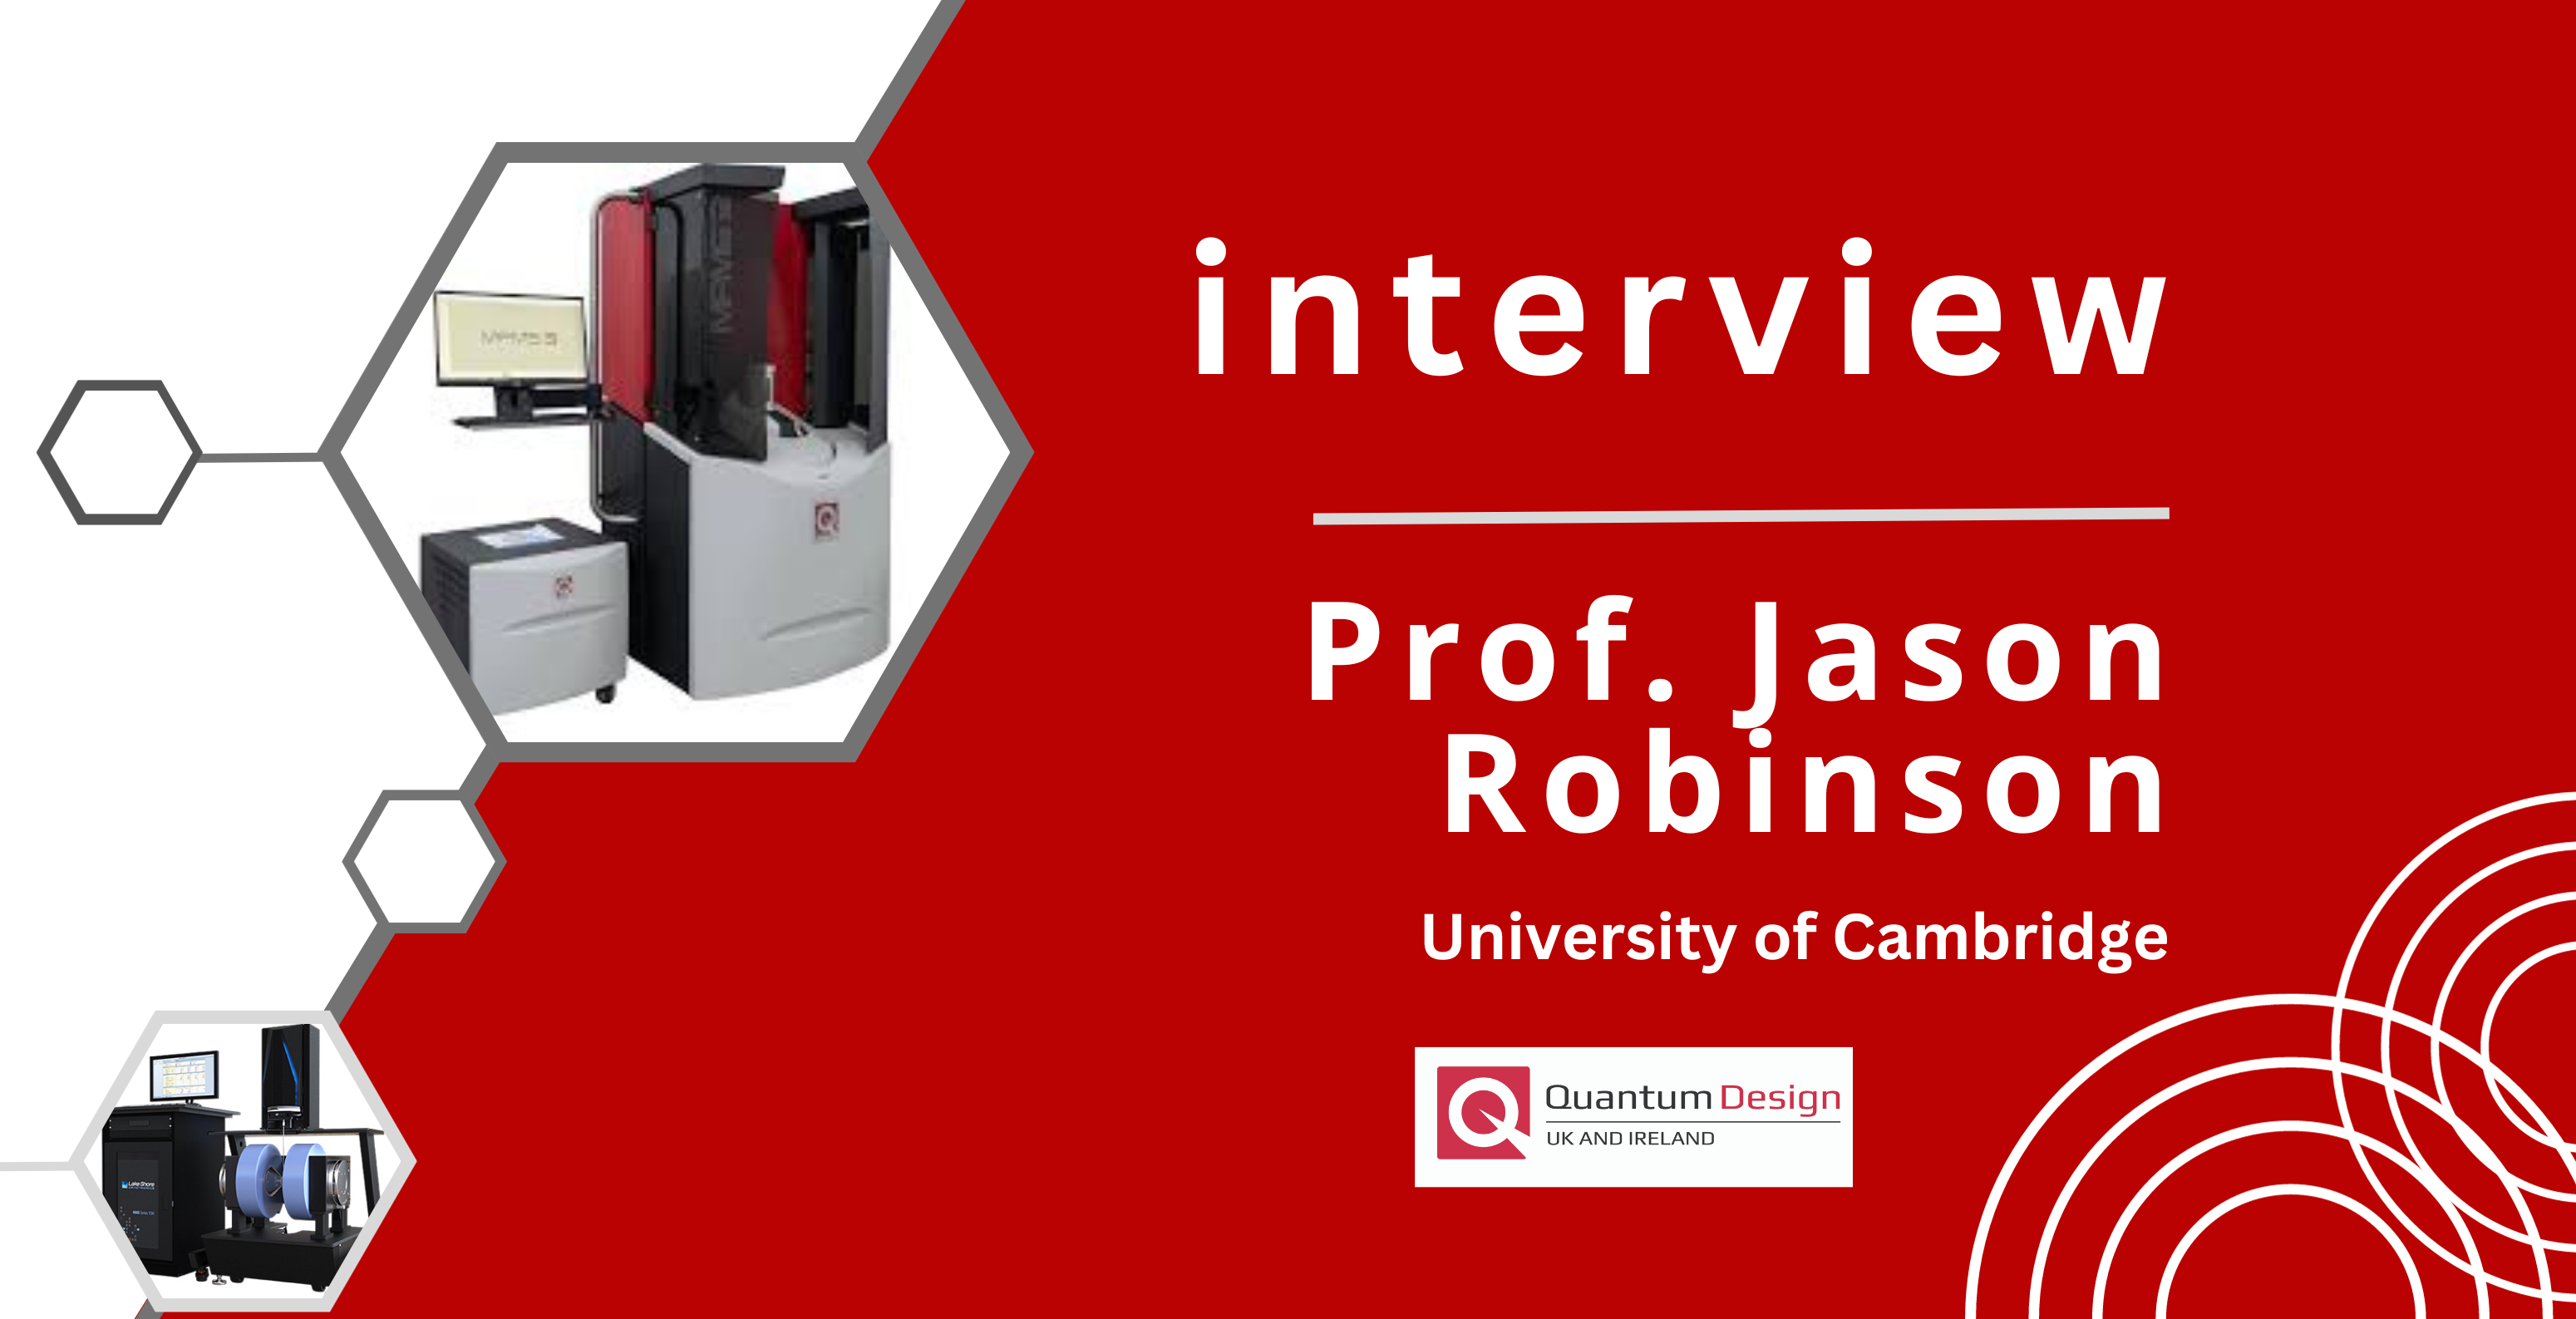 Interview with Prof. Jason Robinson